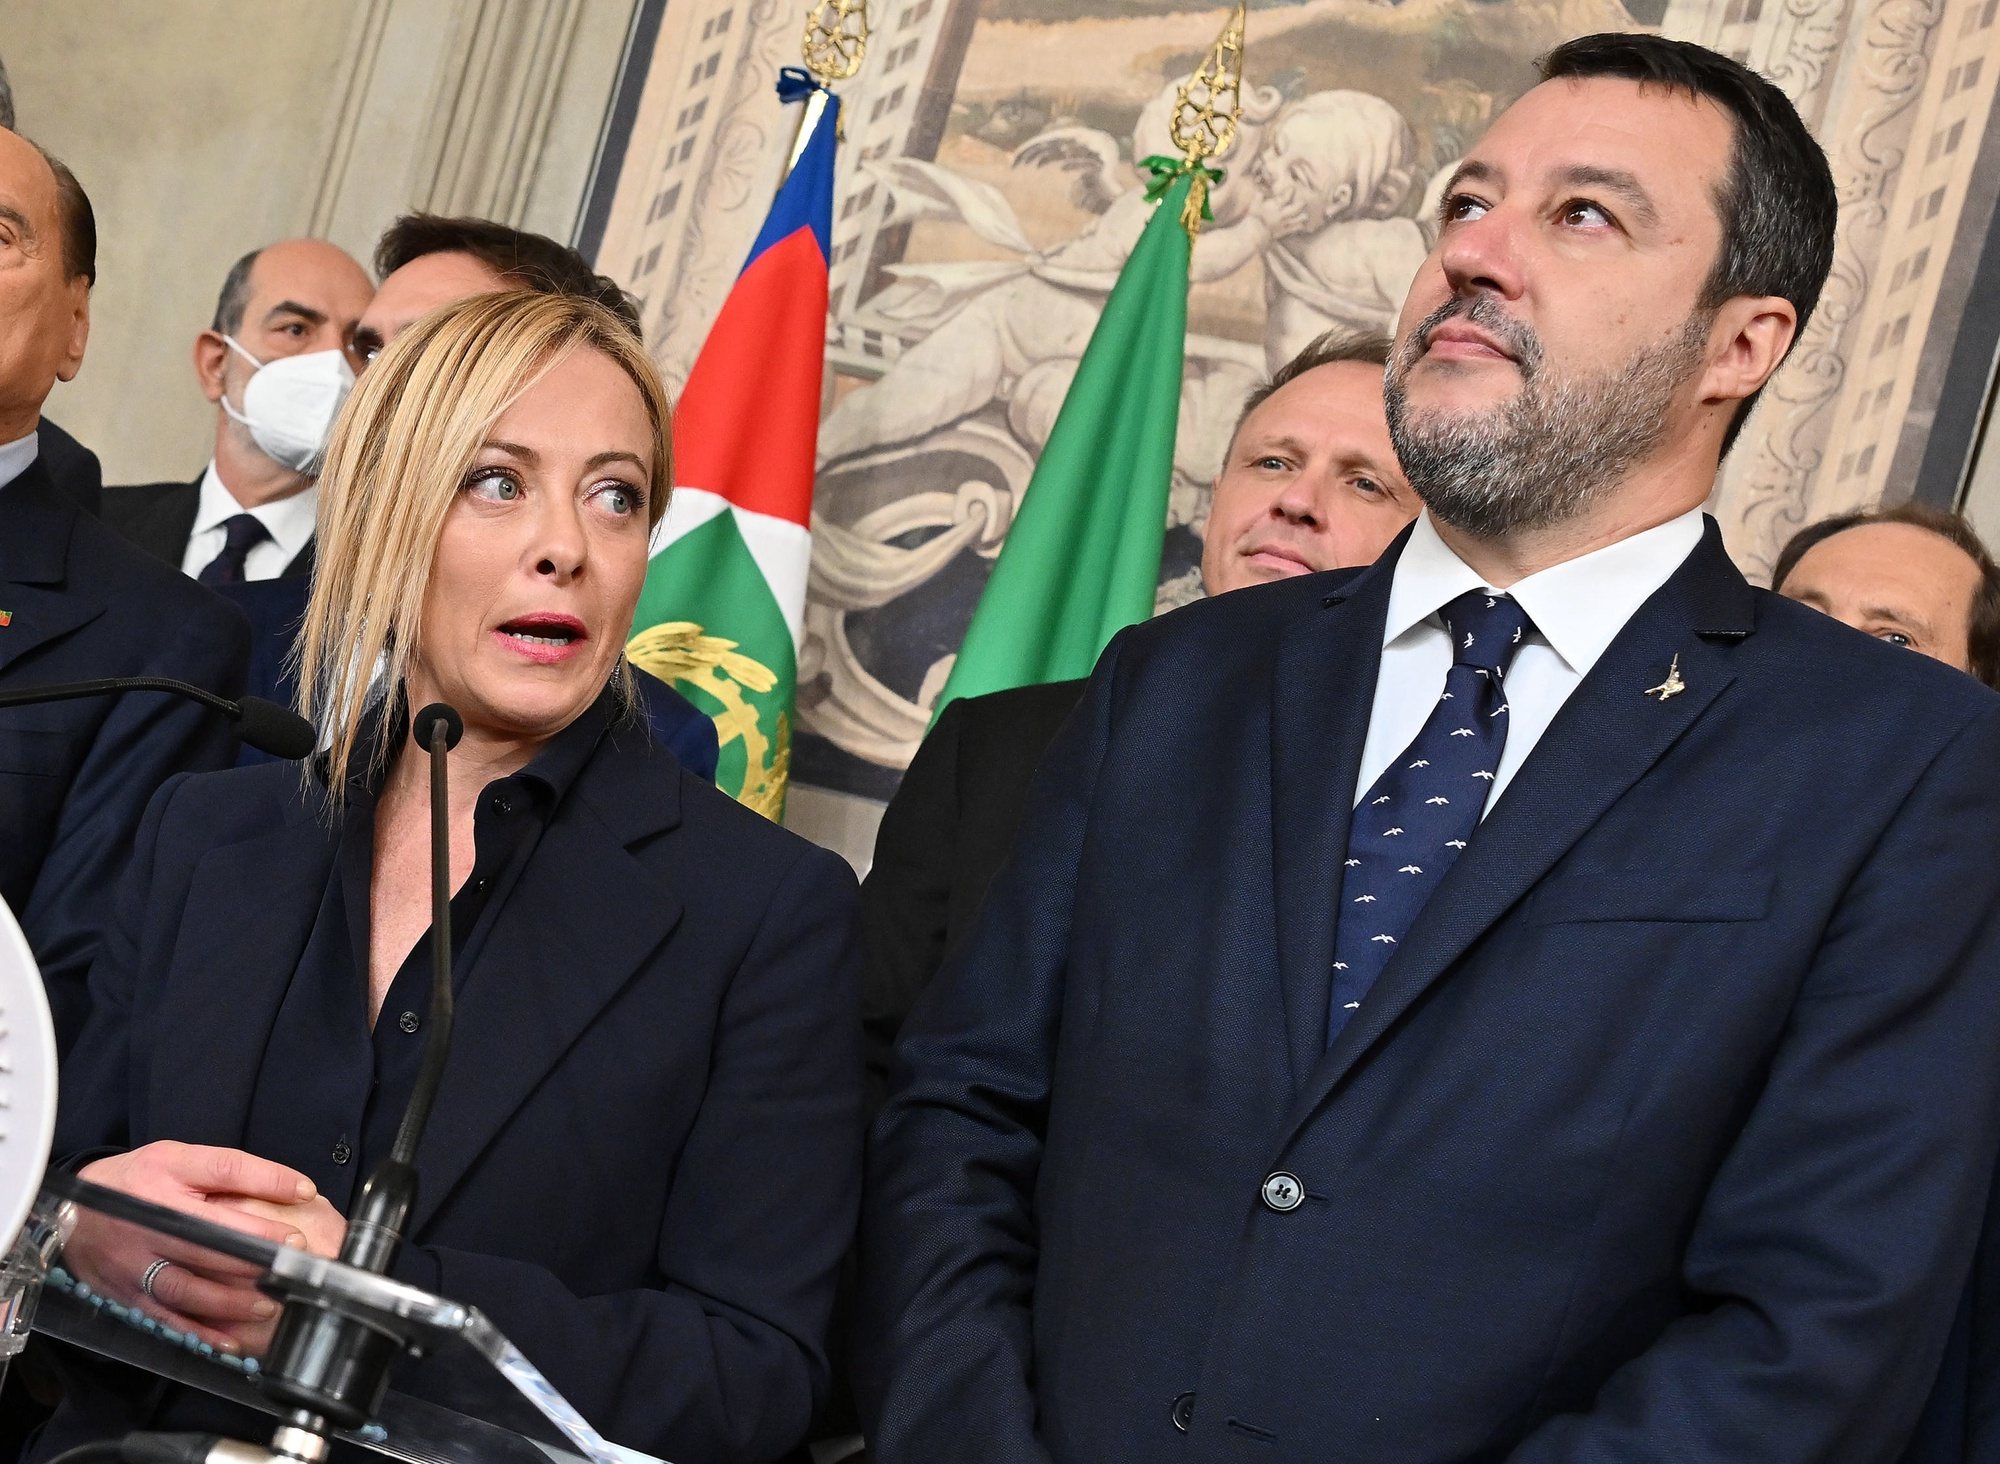 epa10256649 President of the Brothers of Italy party (Fratelli d&#039;Italia, FdI) Giorgia Meloni (L), and Italian Lega party leader Matteo Salvini (R) address the media after a meeting with Italian President Sergio Mattarella for the first round of formal political consultations for new government at the Quirinale Palace in Rome, Italy, 21 October 2022.  EPA/ETTORE FERRARI